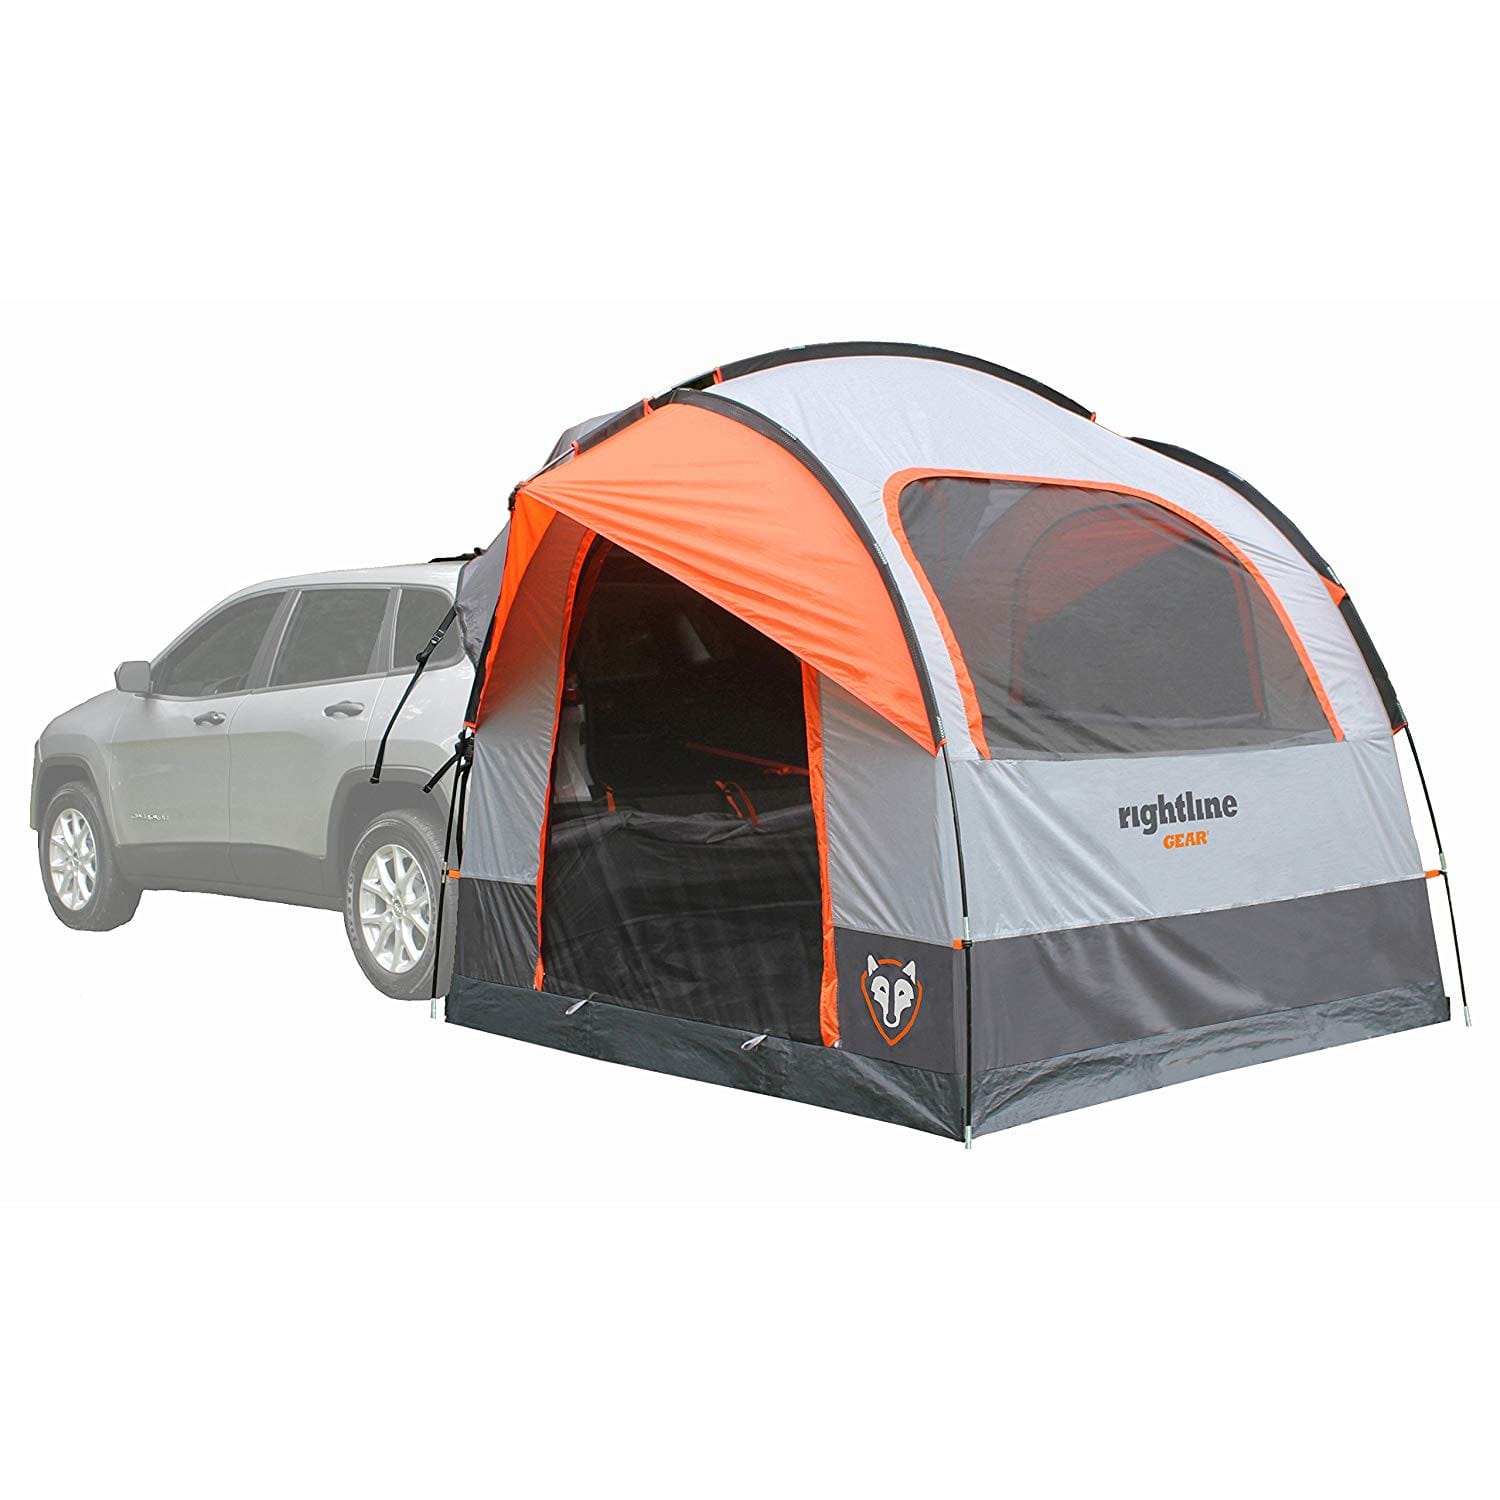 Car Camping Gear: Top 29 Best Products for Car Camping - 2022 Edition